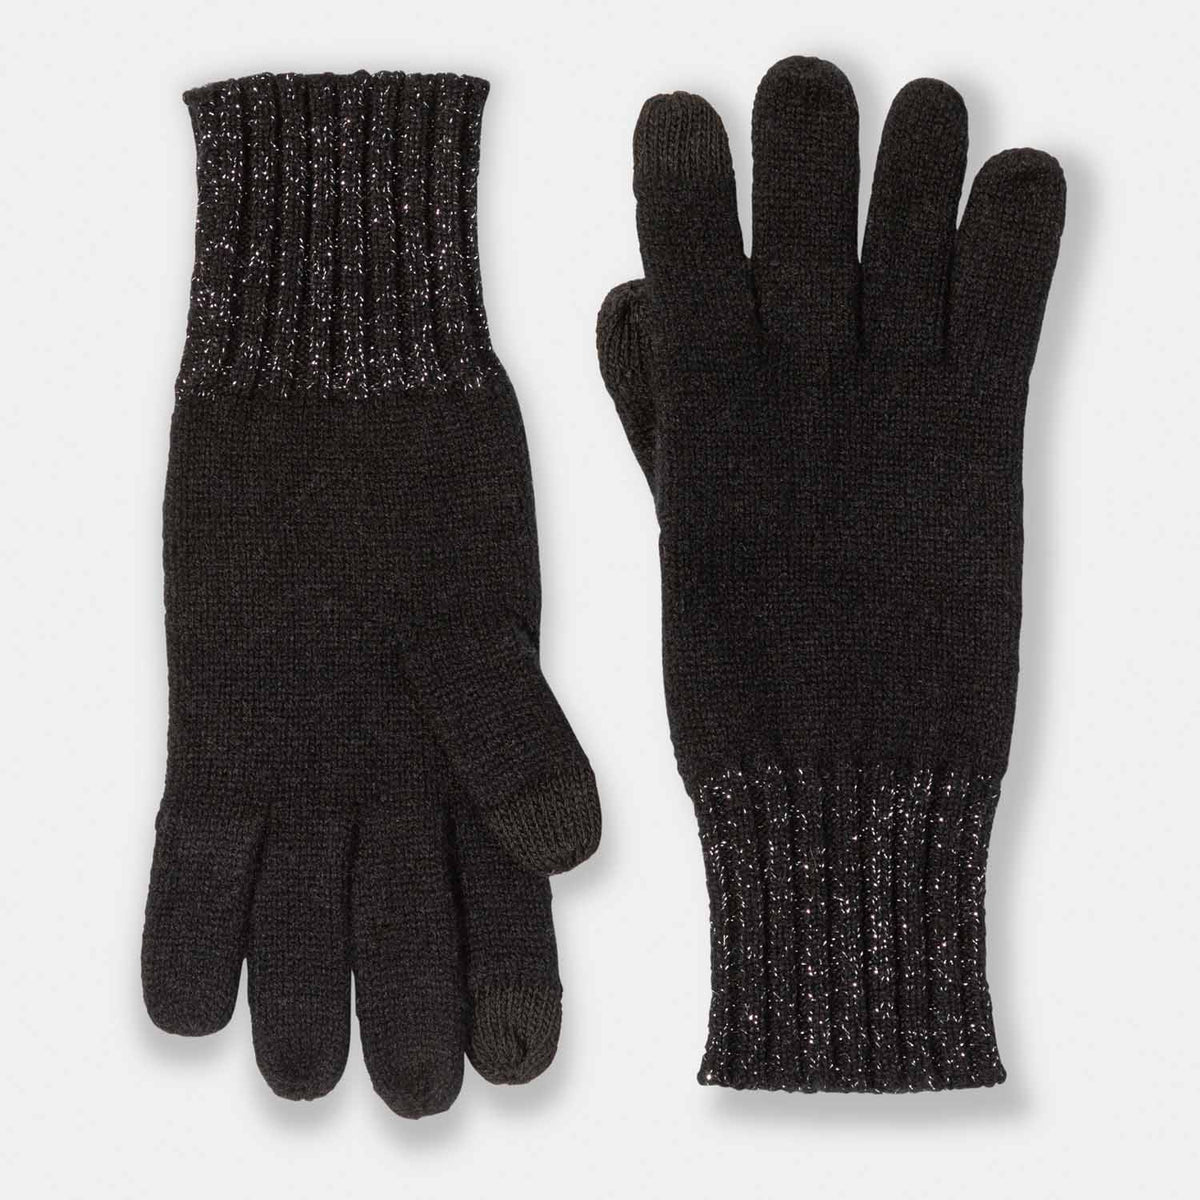 Picture of cashmere knit glove with shiny lurex cuff detail, black